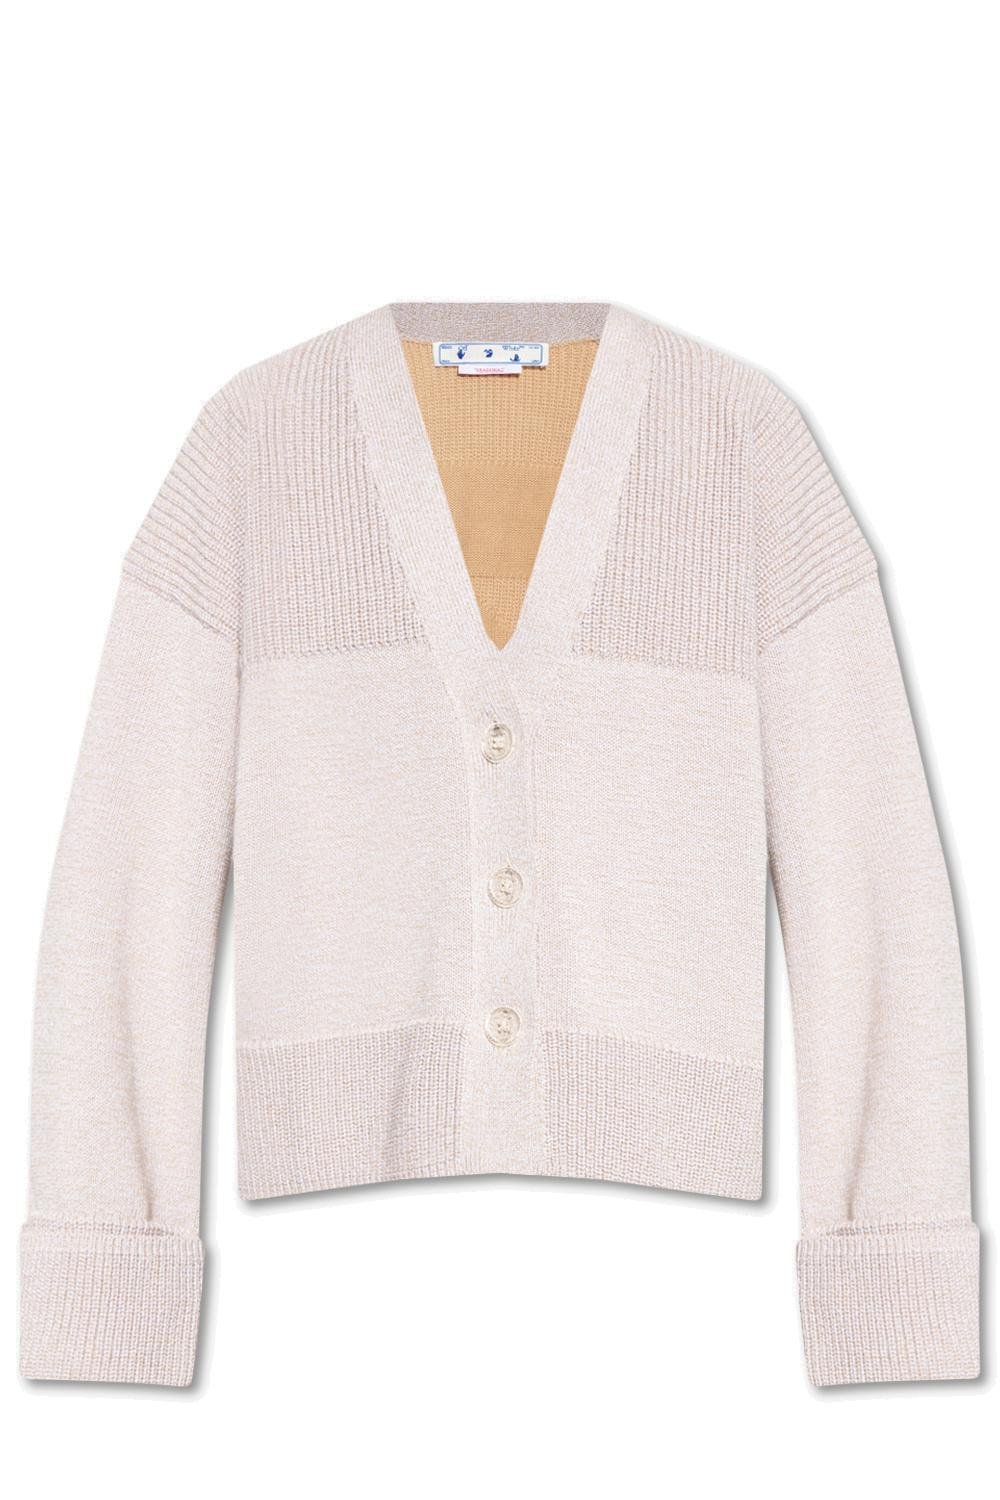 Off-White V-Neck Buttoned Knitted Cardigan